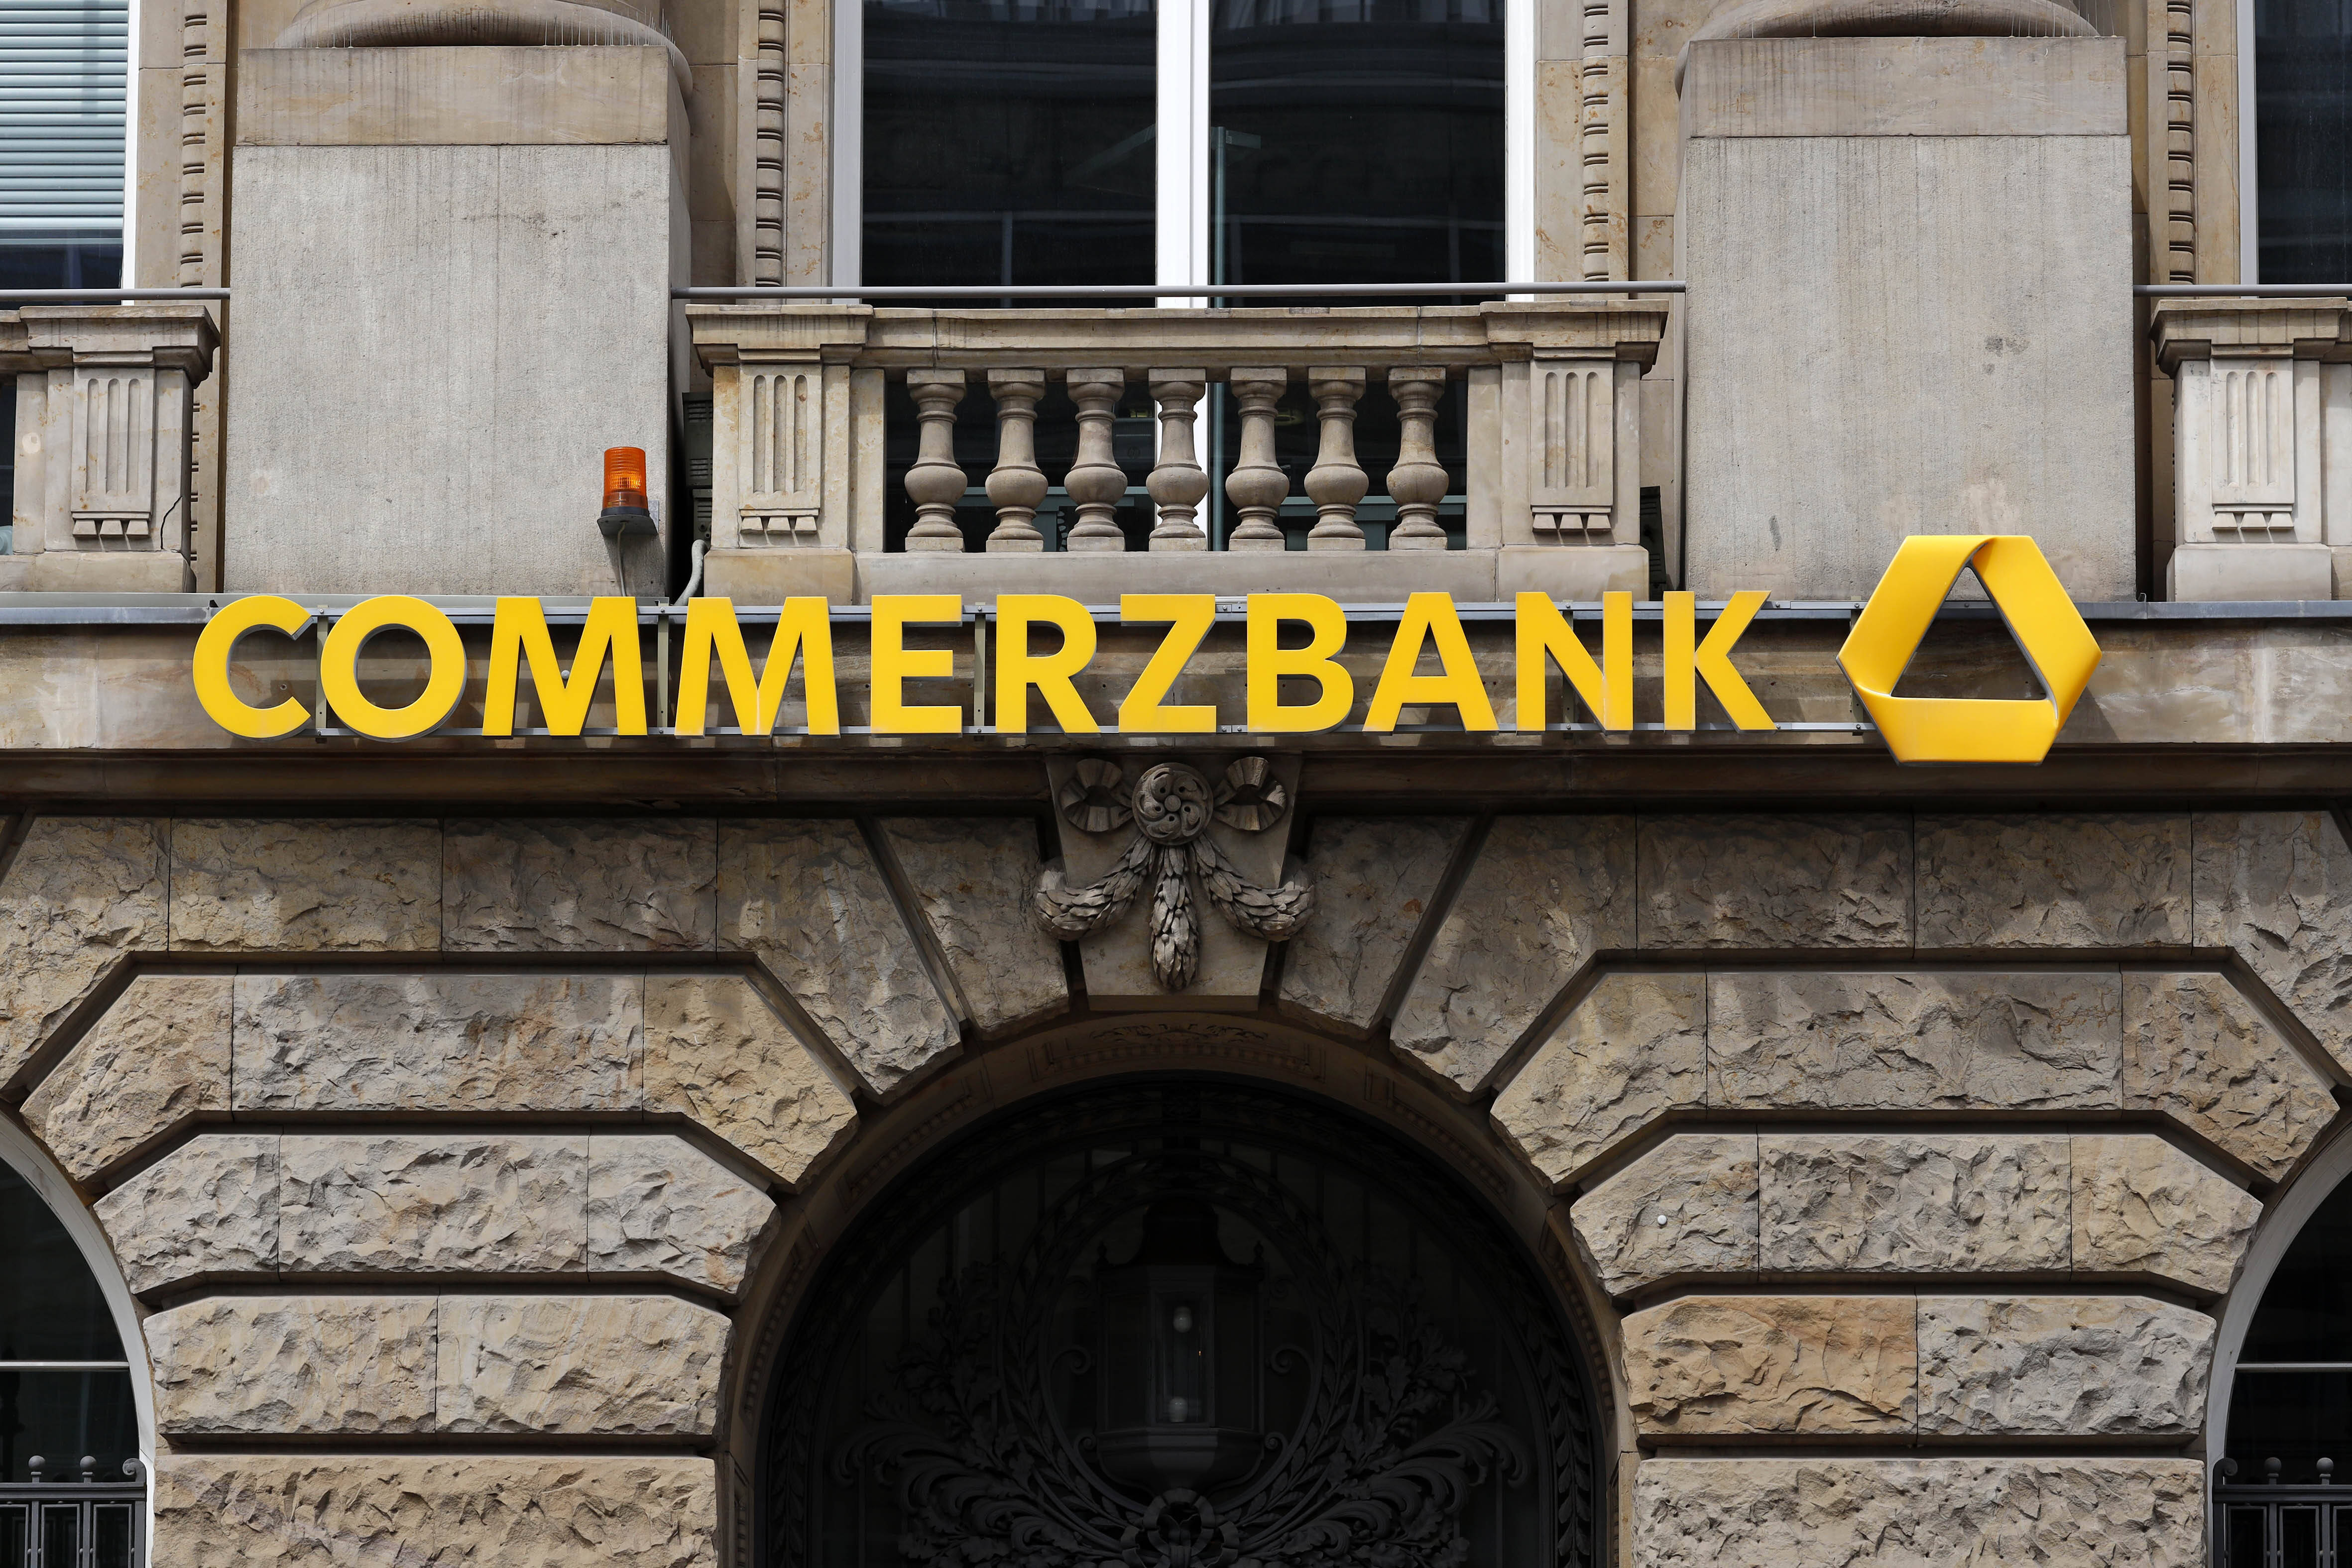 20211015-image-mb-pa-commerzbank